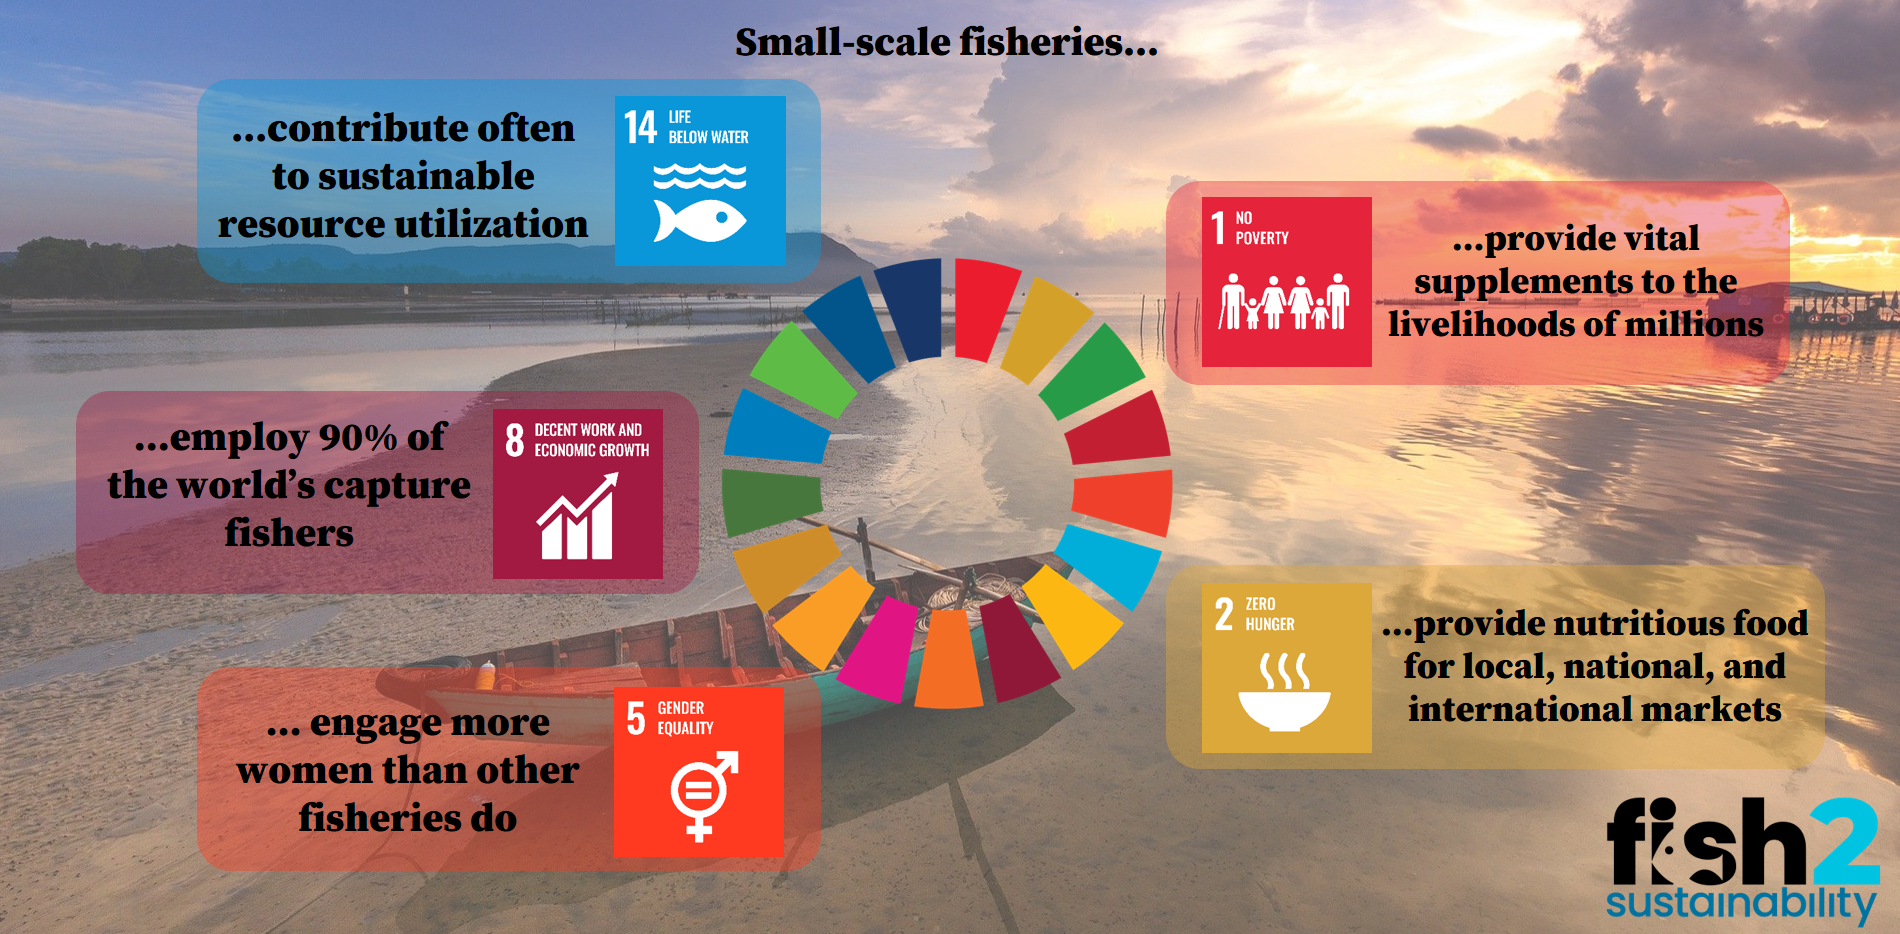 Examples of SSF contributions to SDGs, adapted from the FAO SSF Guidelines (2015)